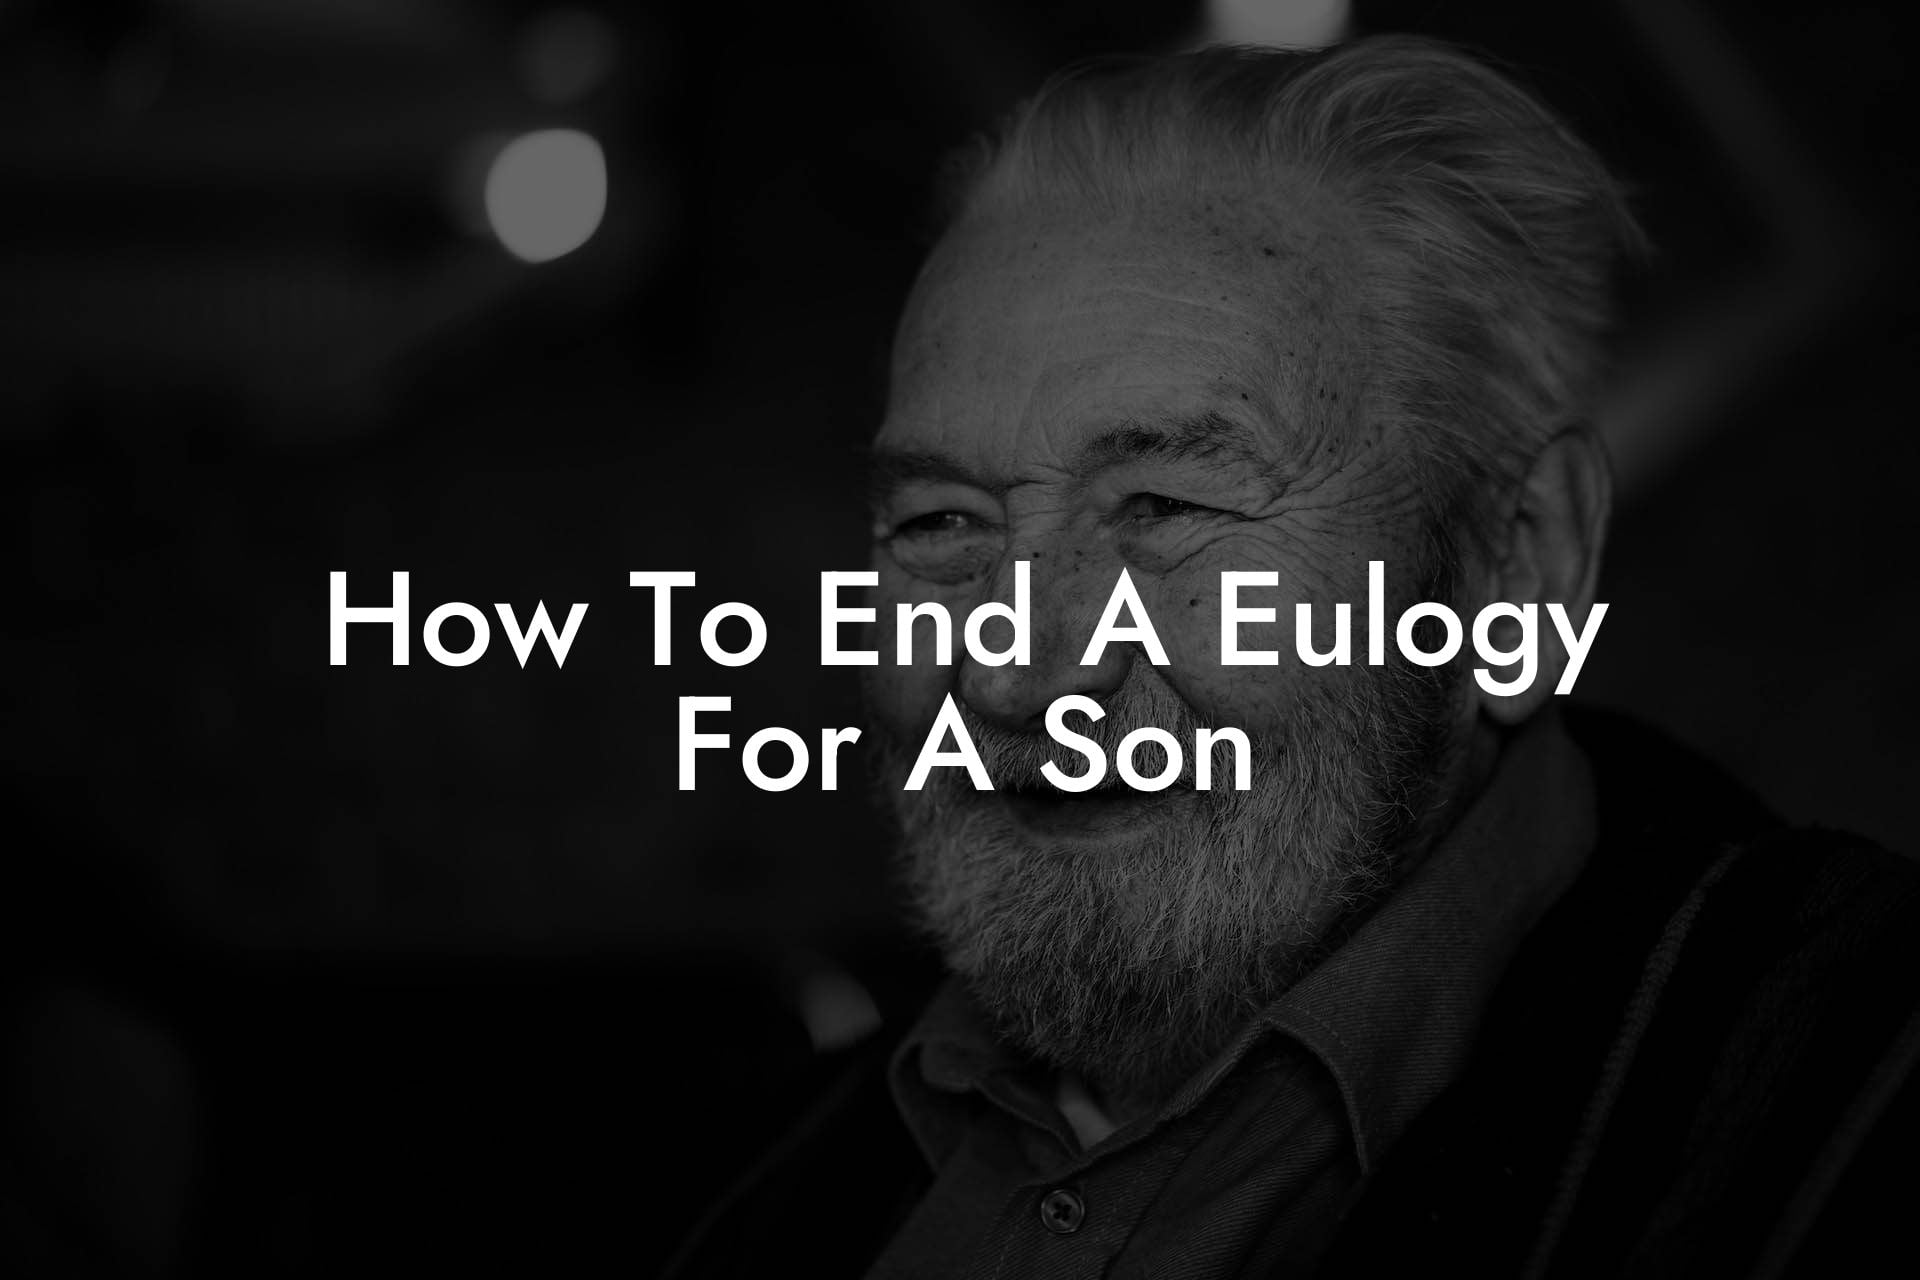 How To End A Eulogy For A Son